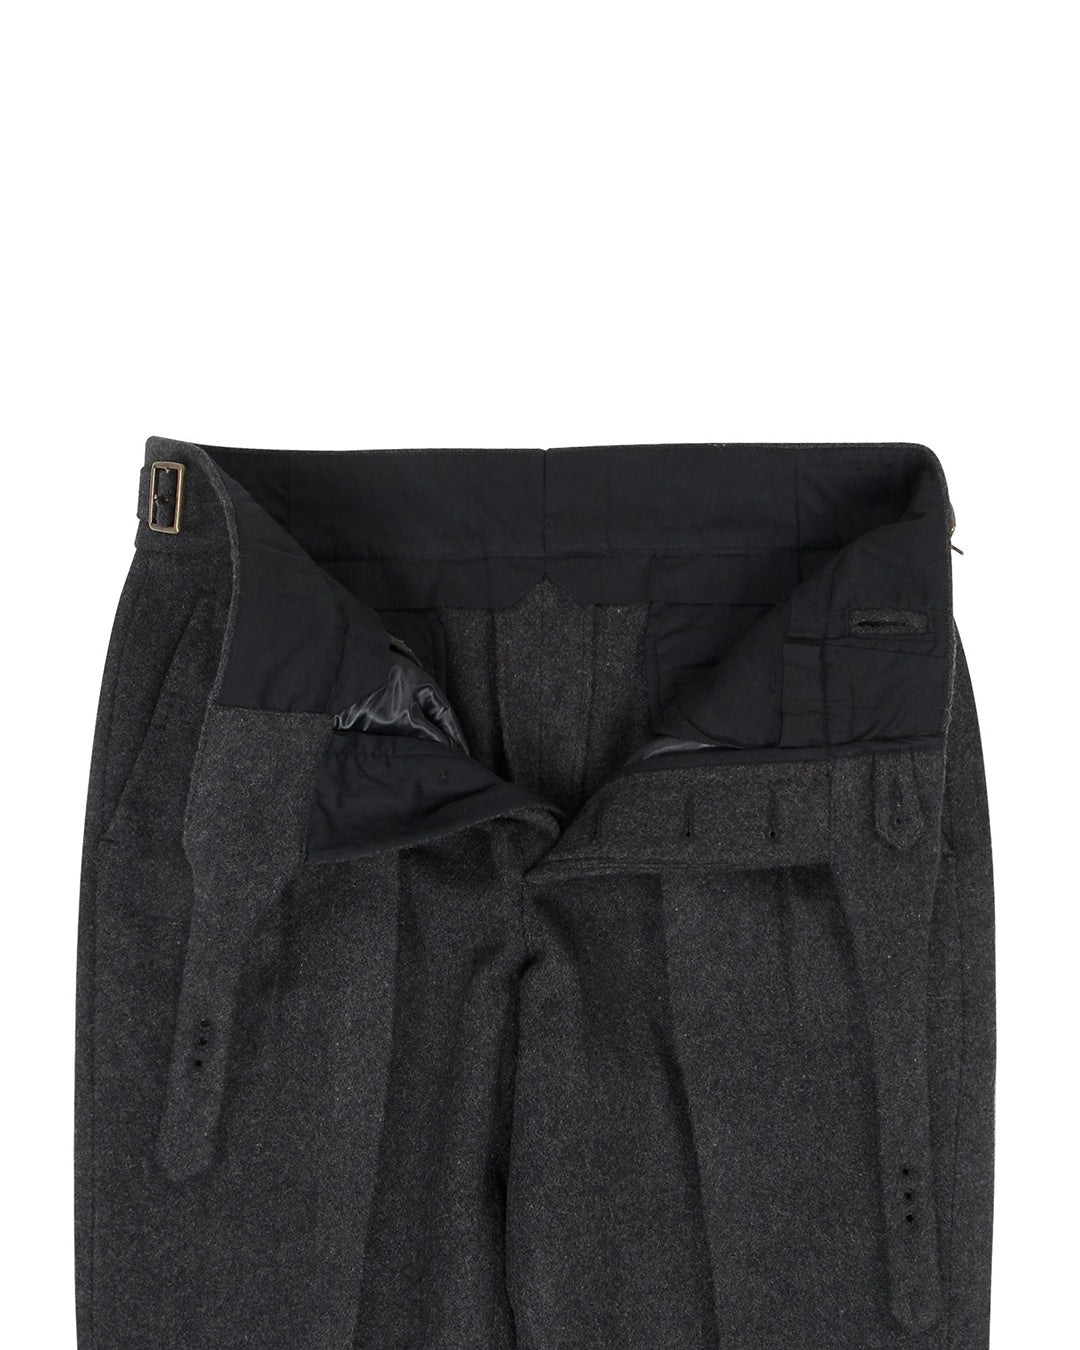 Open front view of the Gurkha Pant in Charcoal Grey Wool